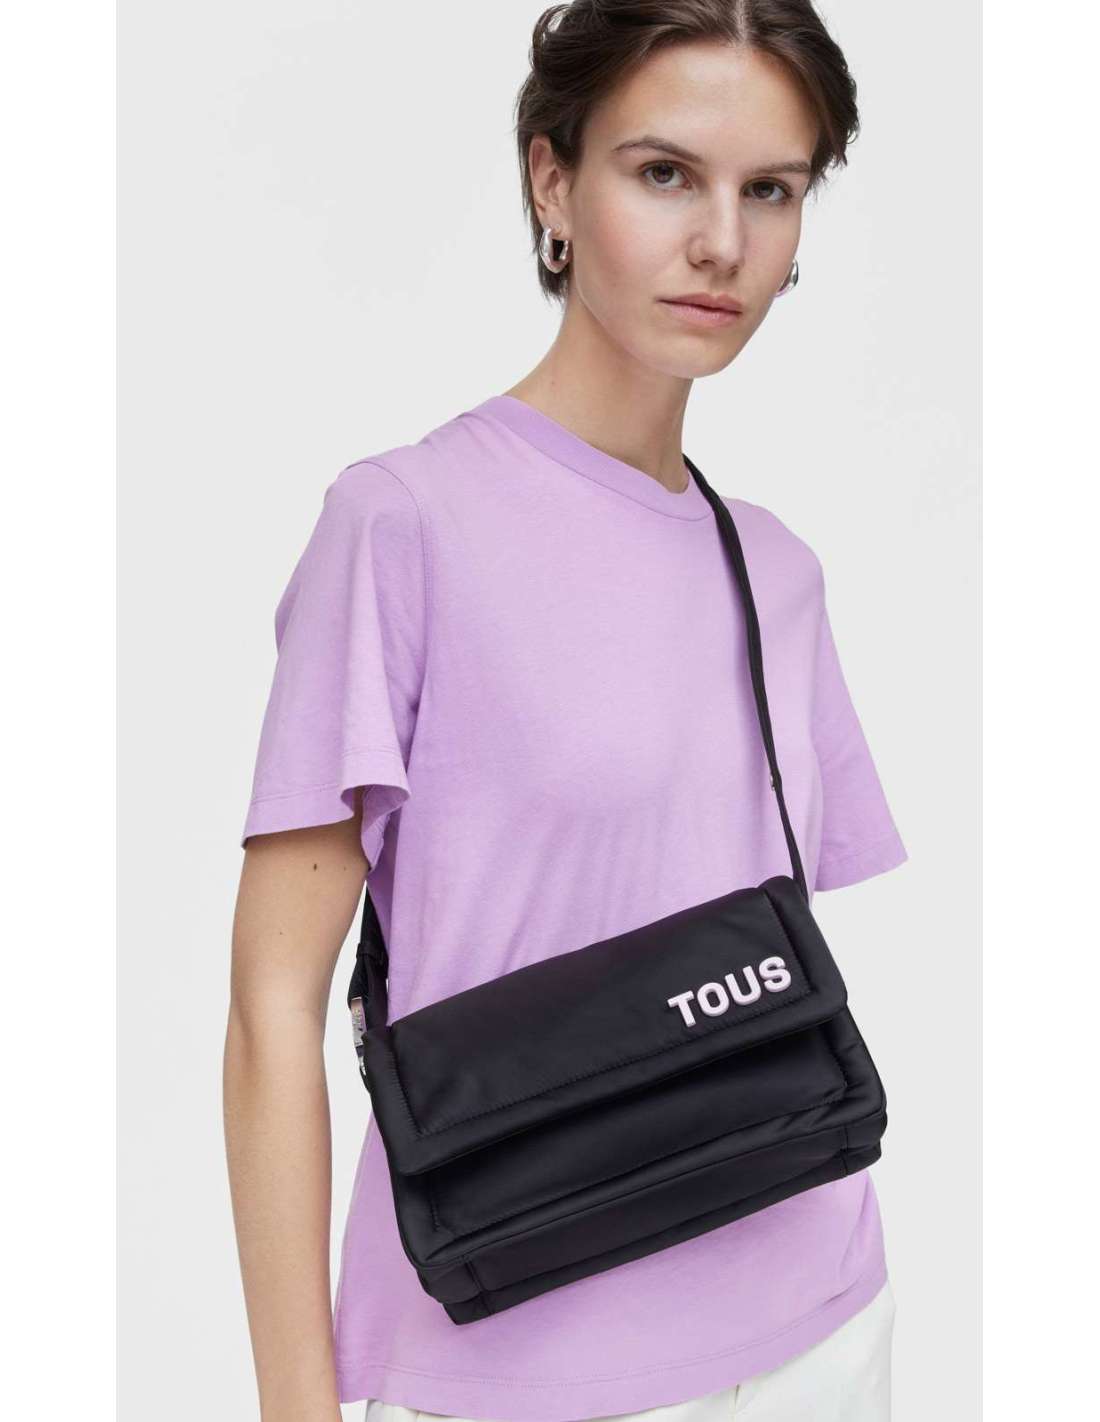 Tous - Bolso mujer mod. 20015068